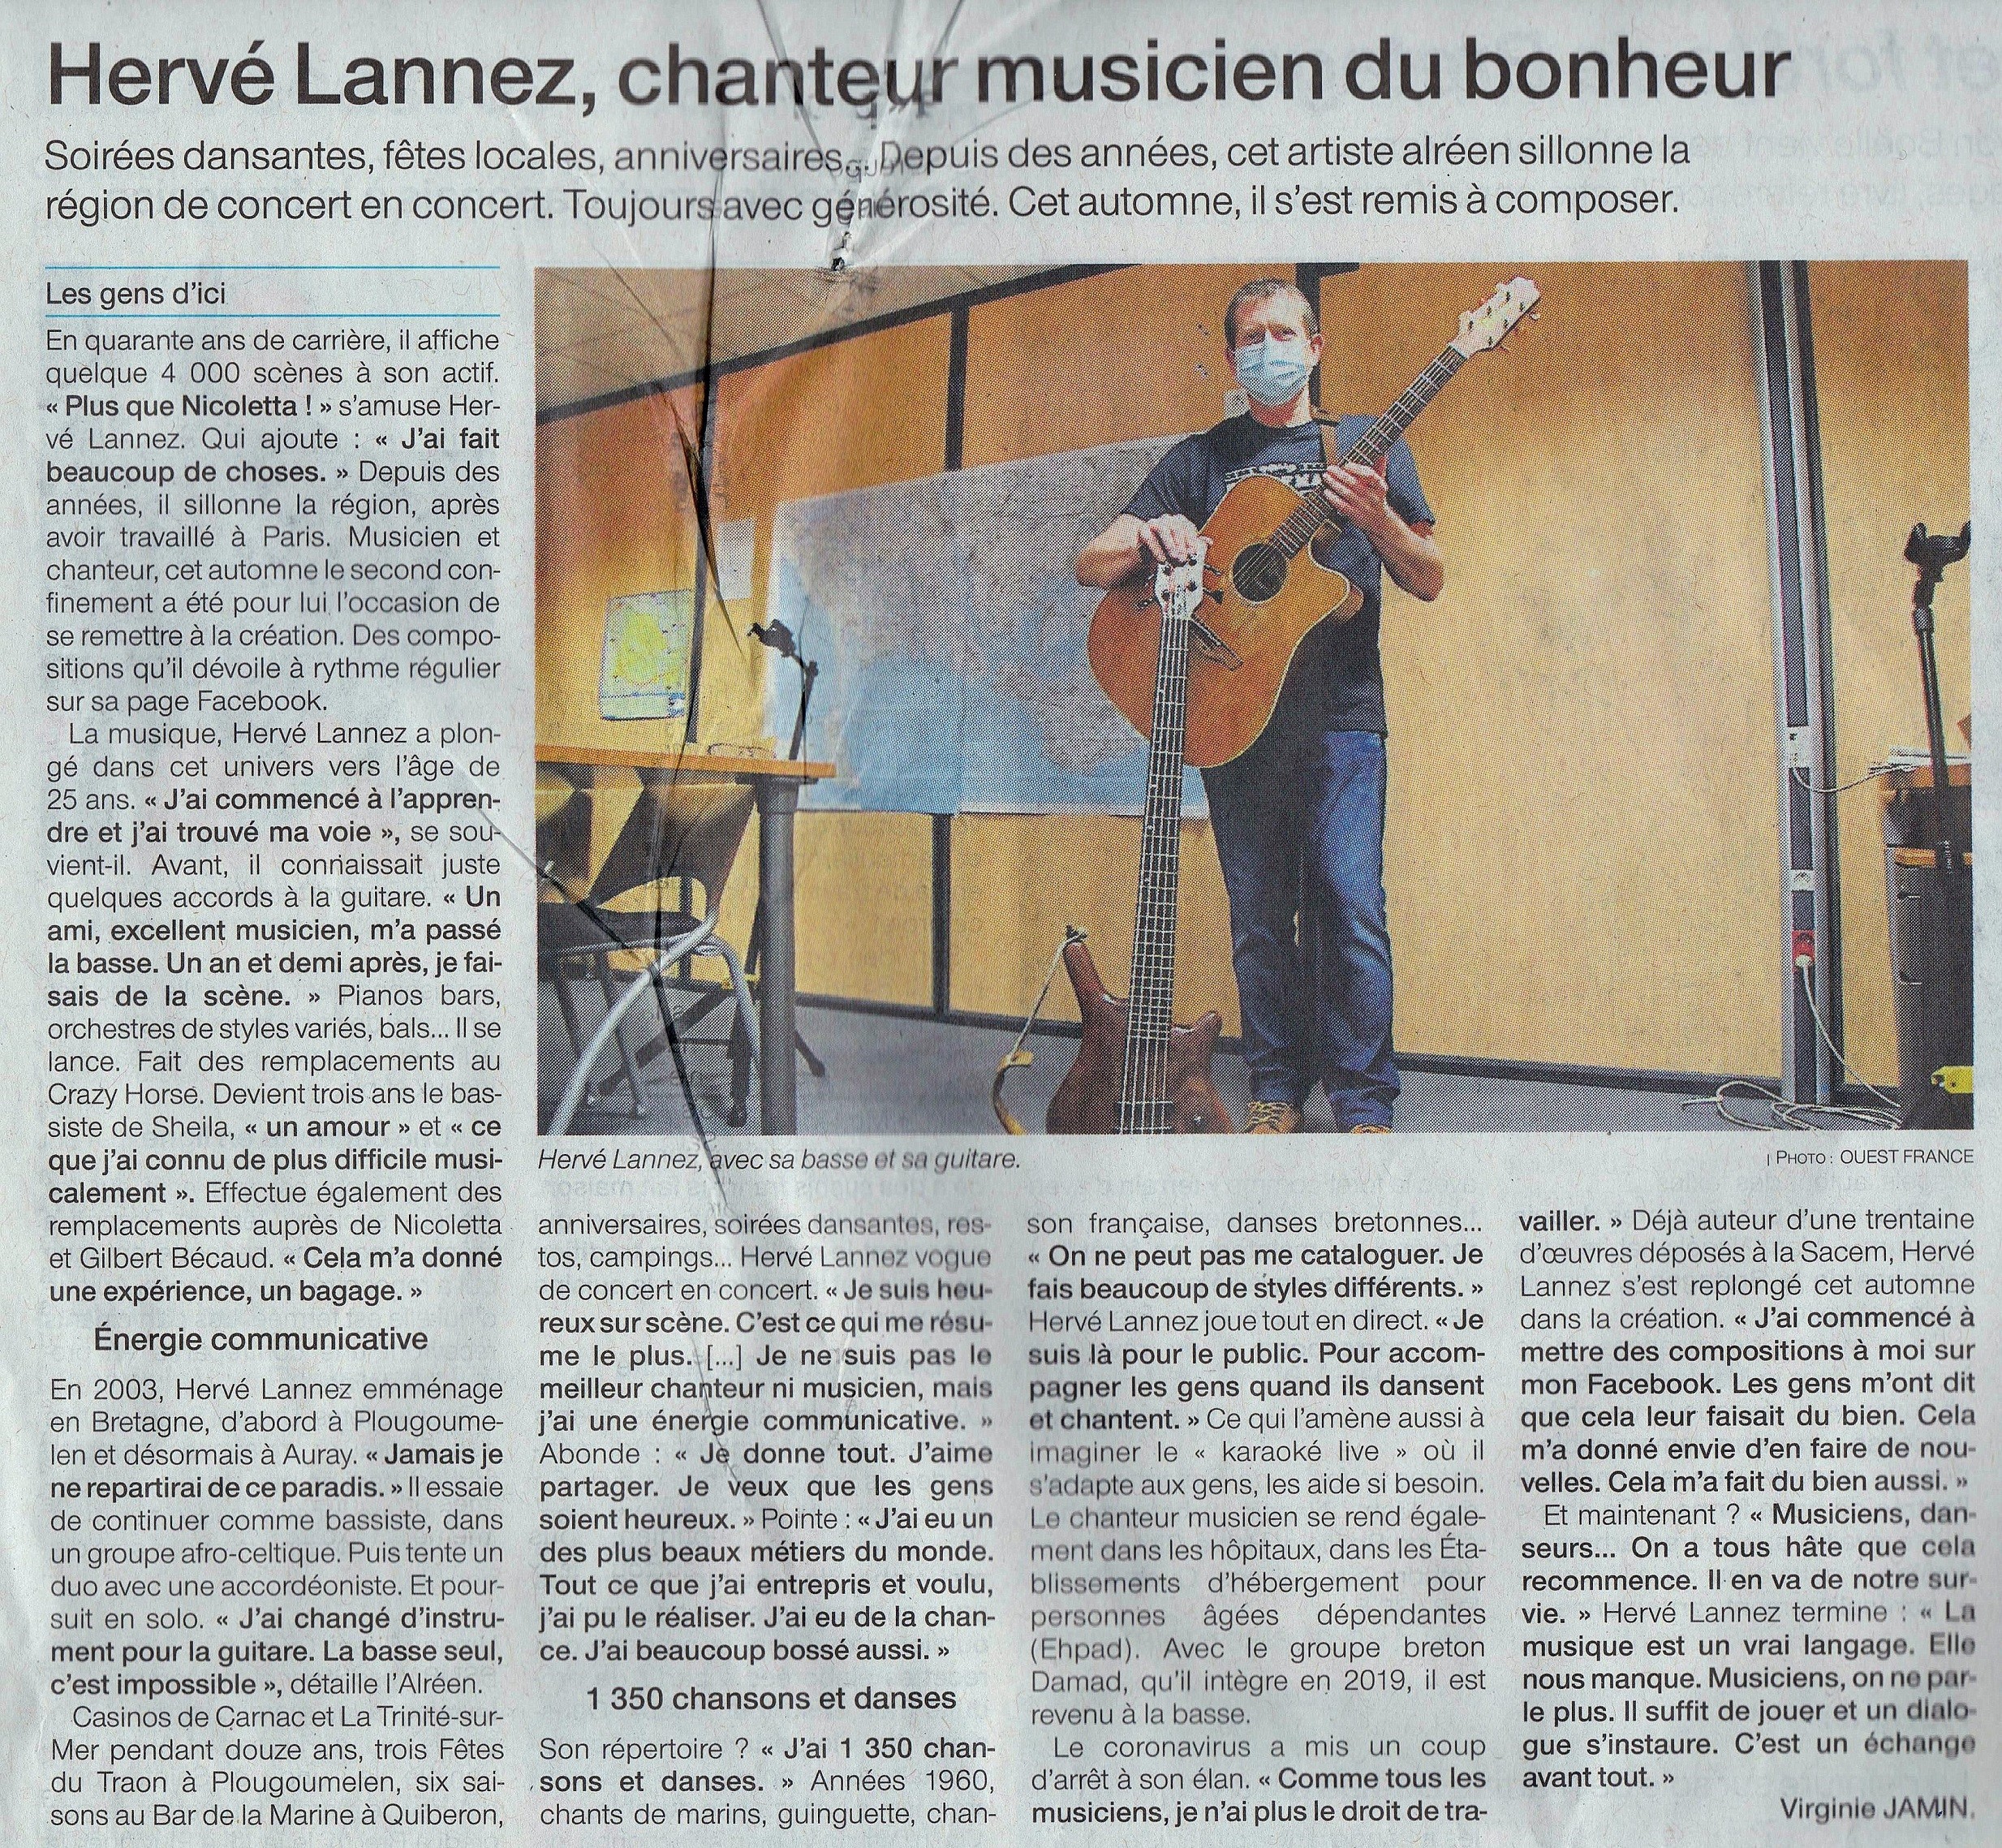 2020 12 29 ouest france article